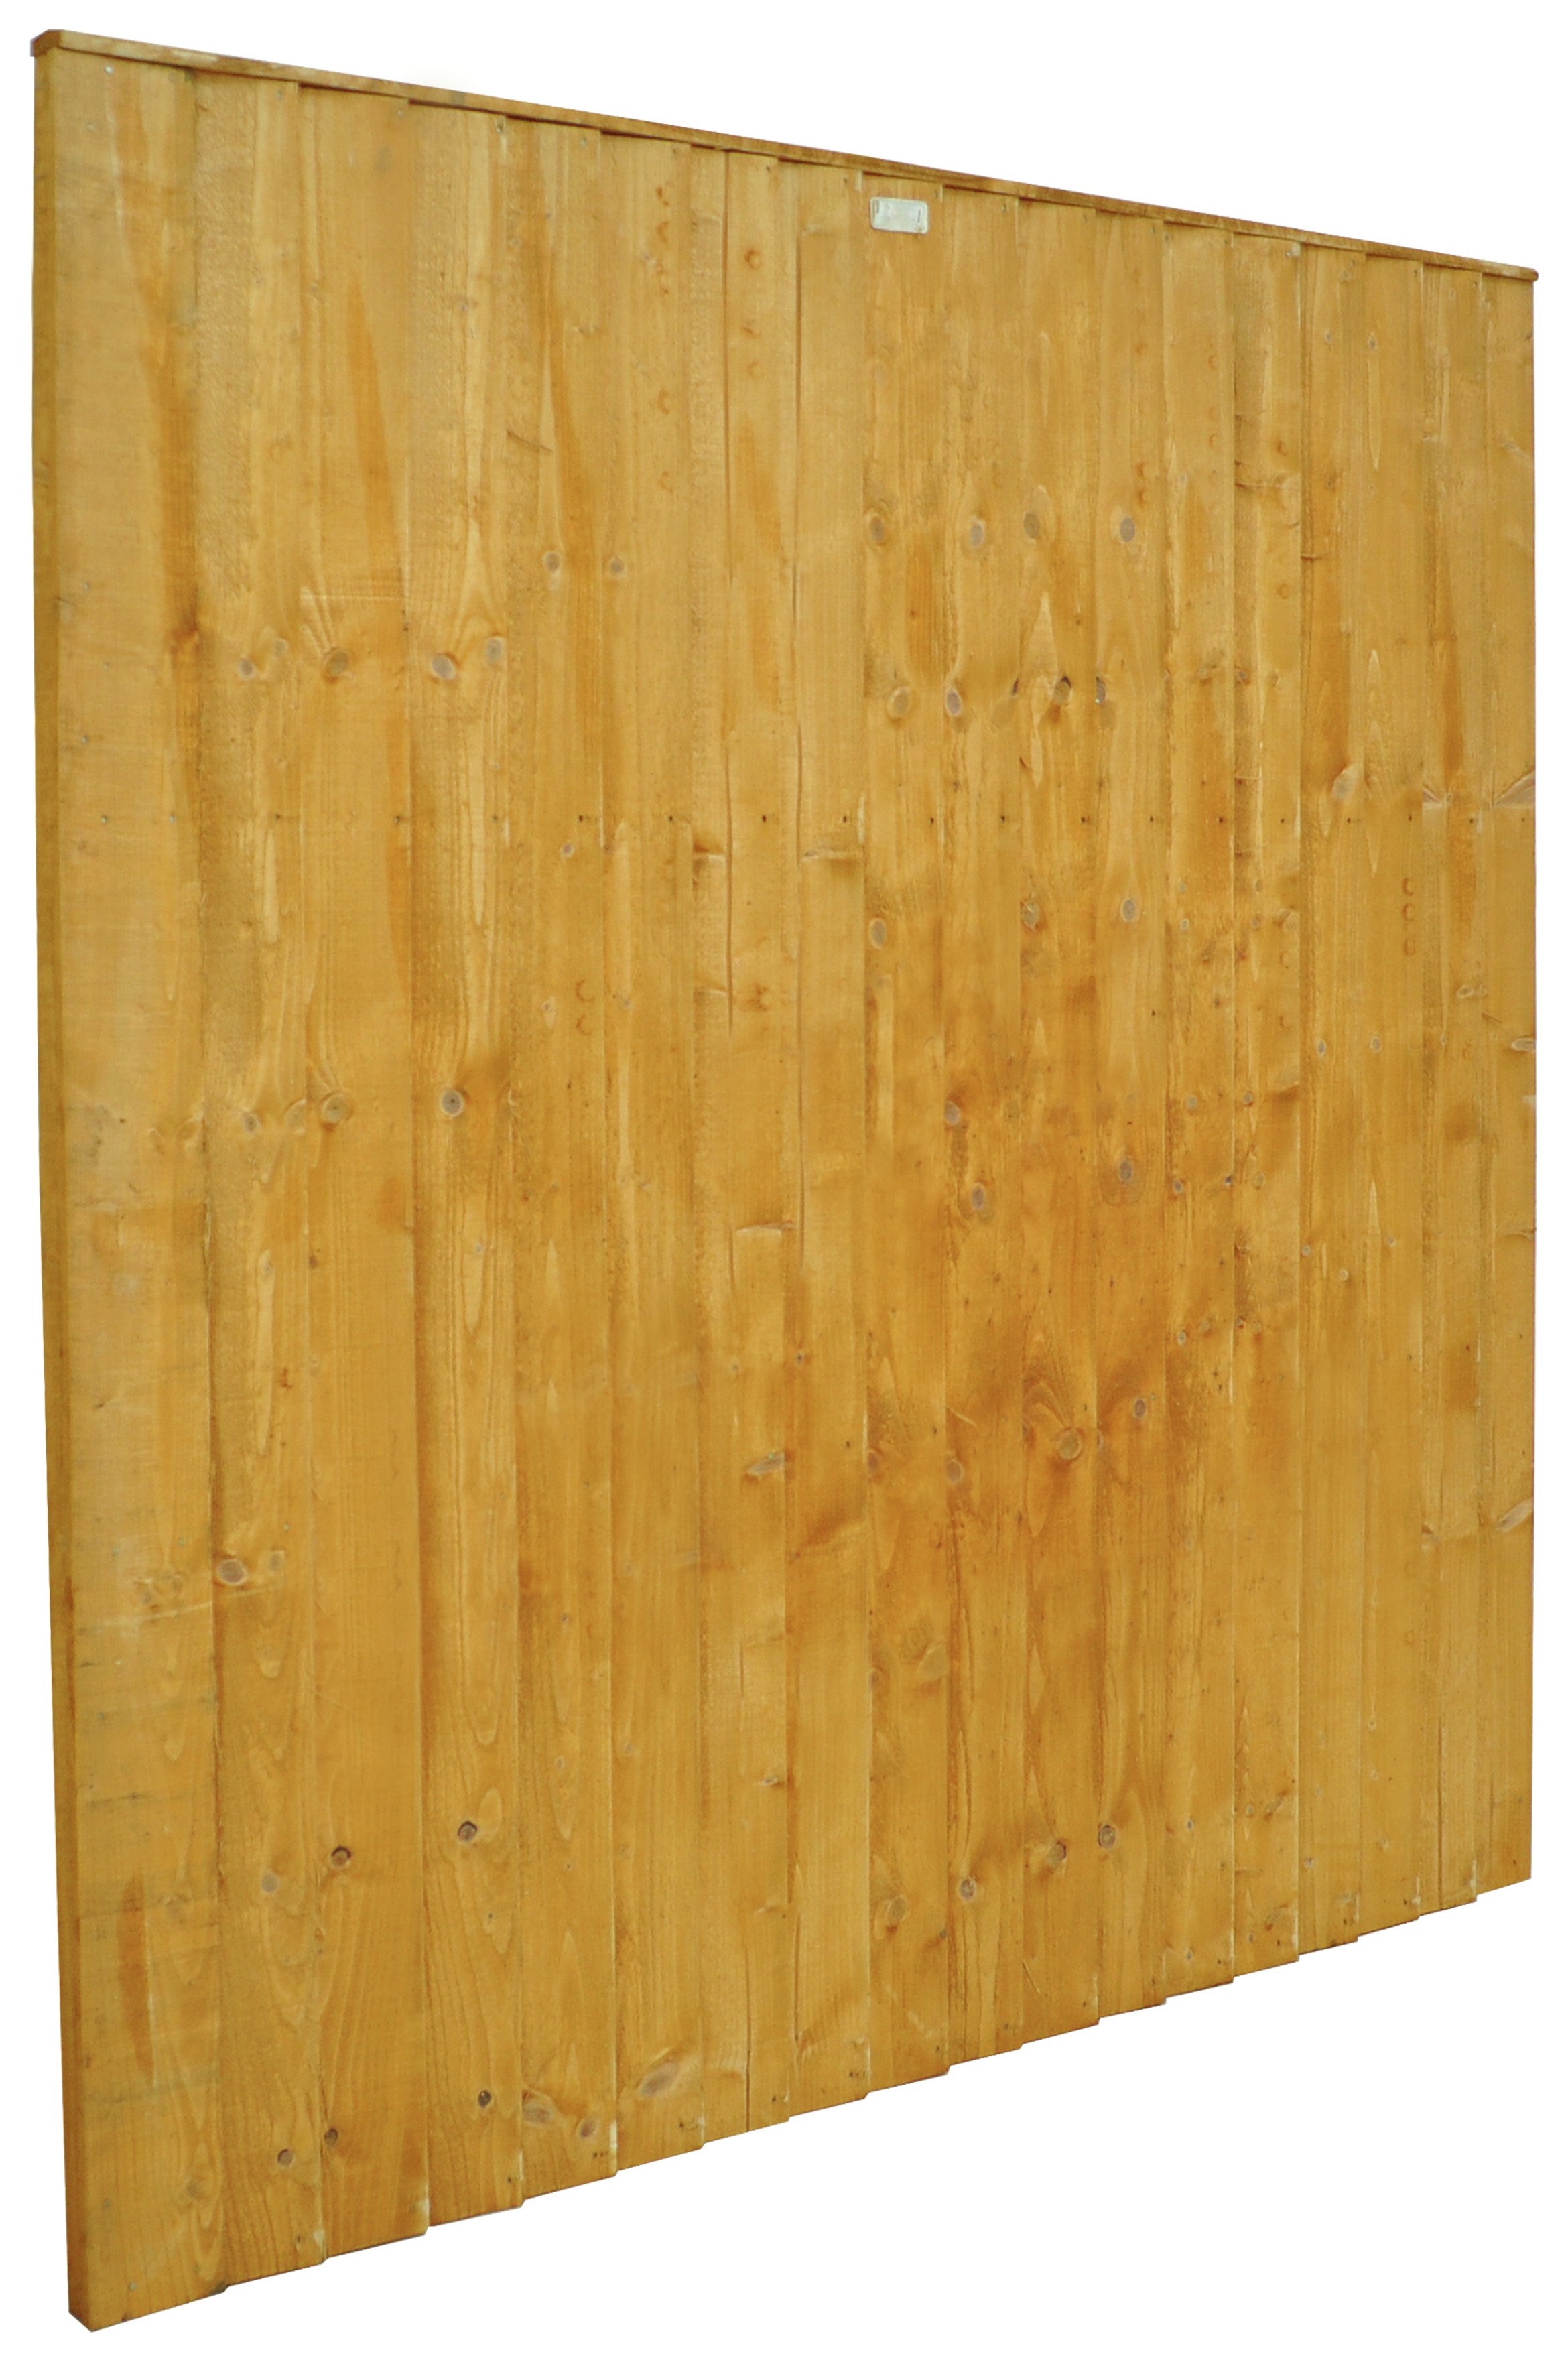 Forest 6ft (1.85m) Featheredge Fence Panel Review